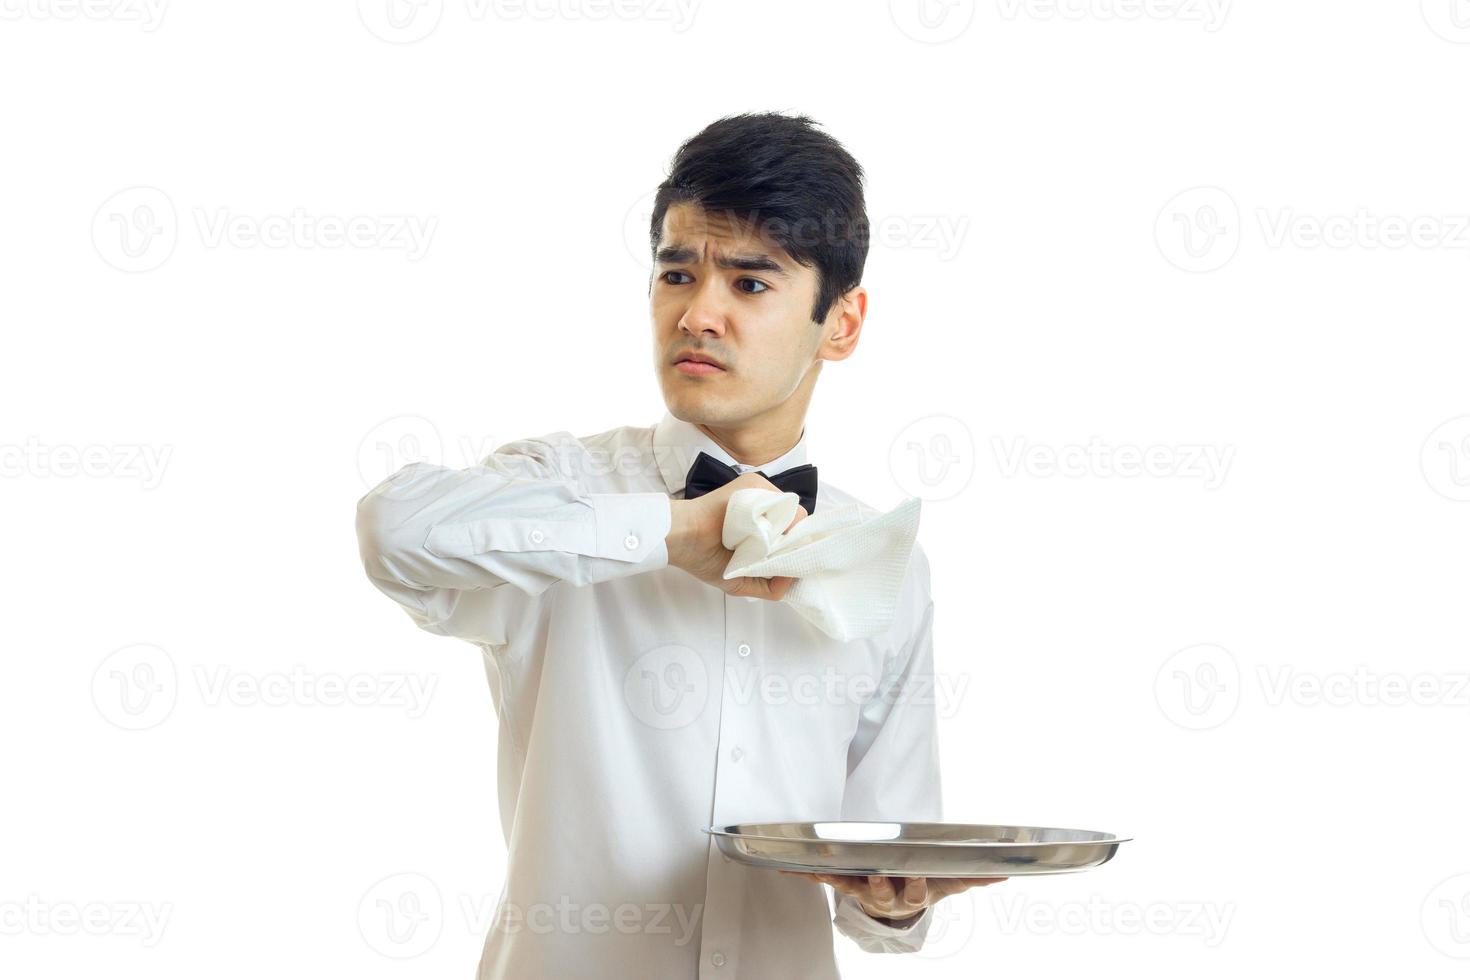 serious young waiter in a shirt holding a towel in the other hand holds the tray and looks toward photo